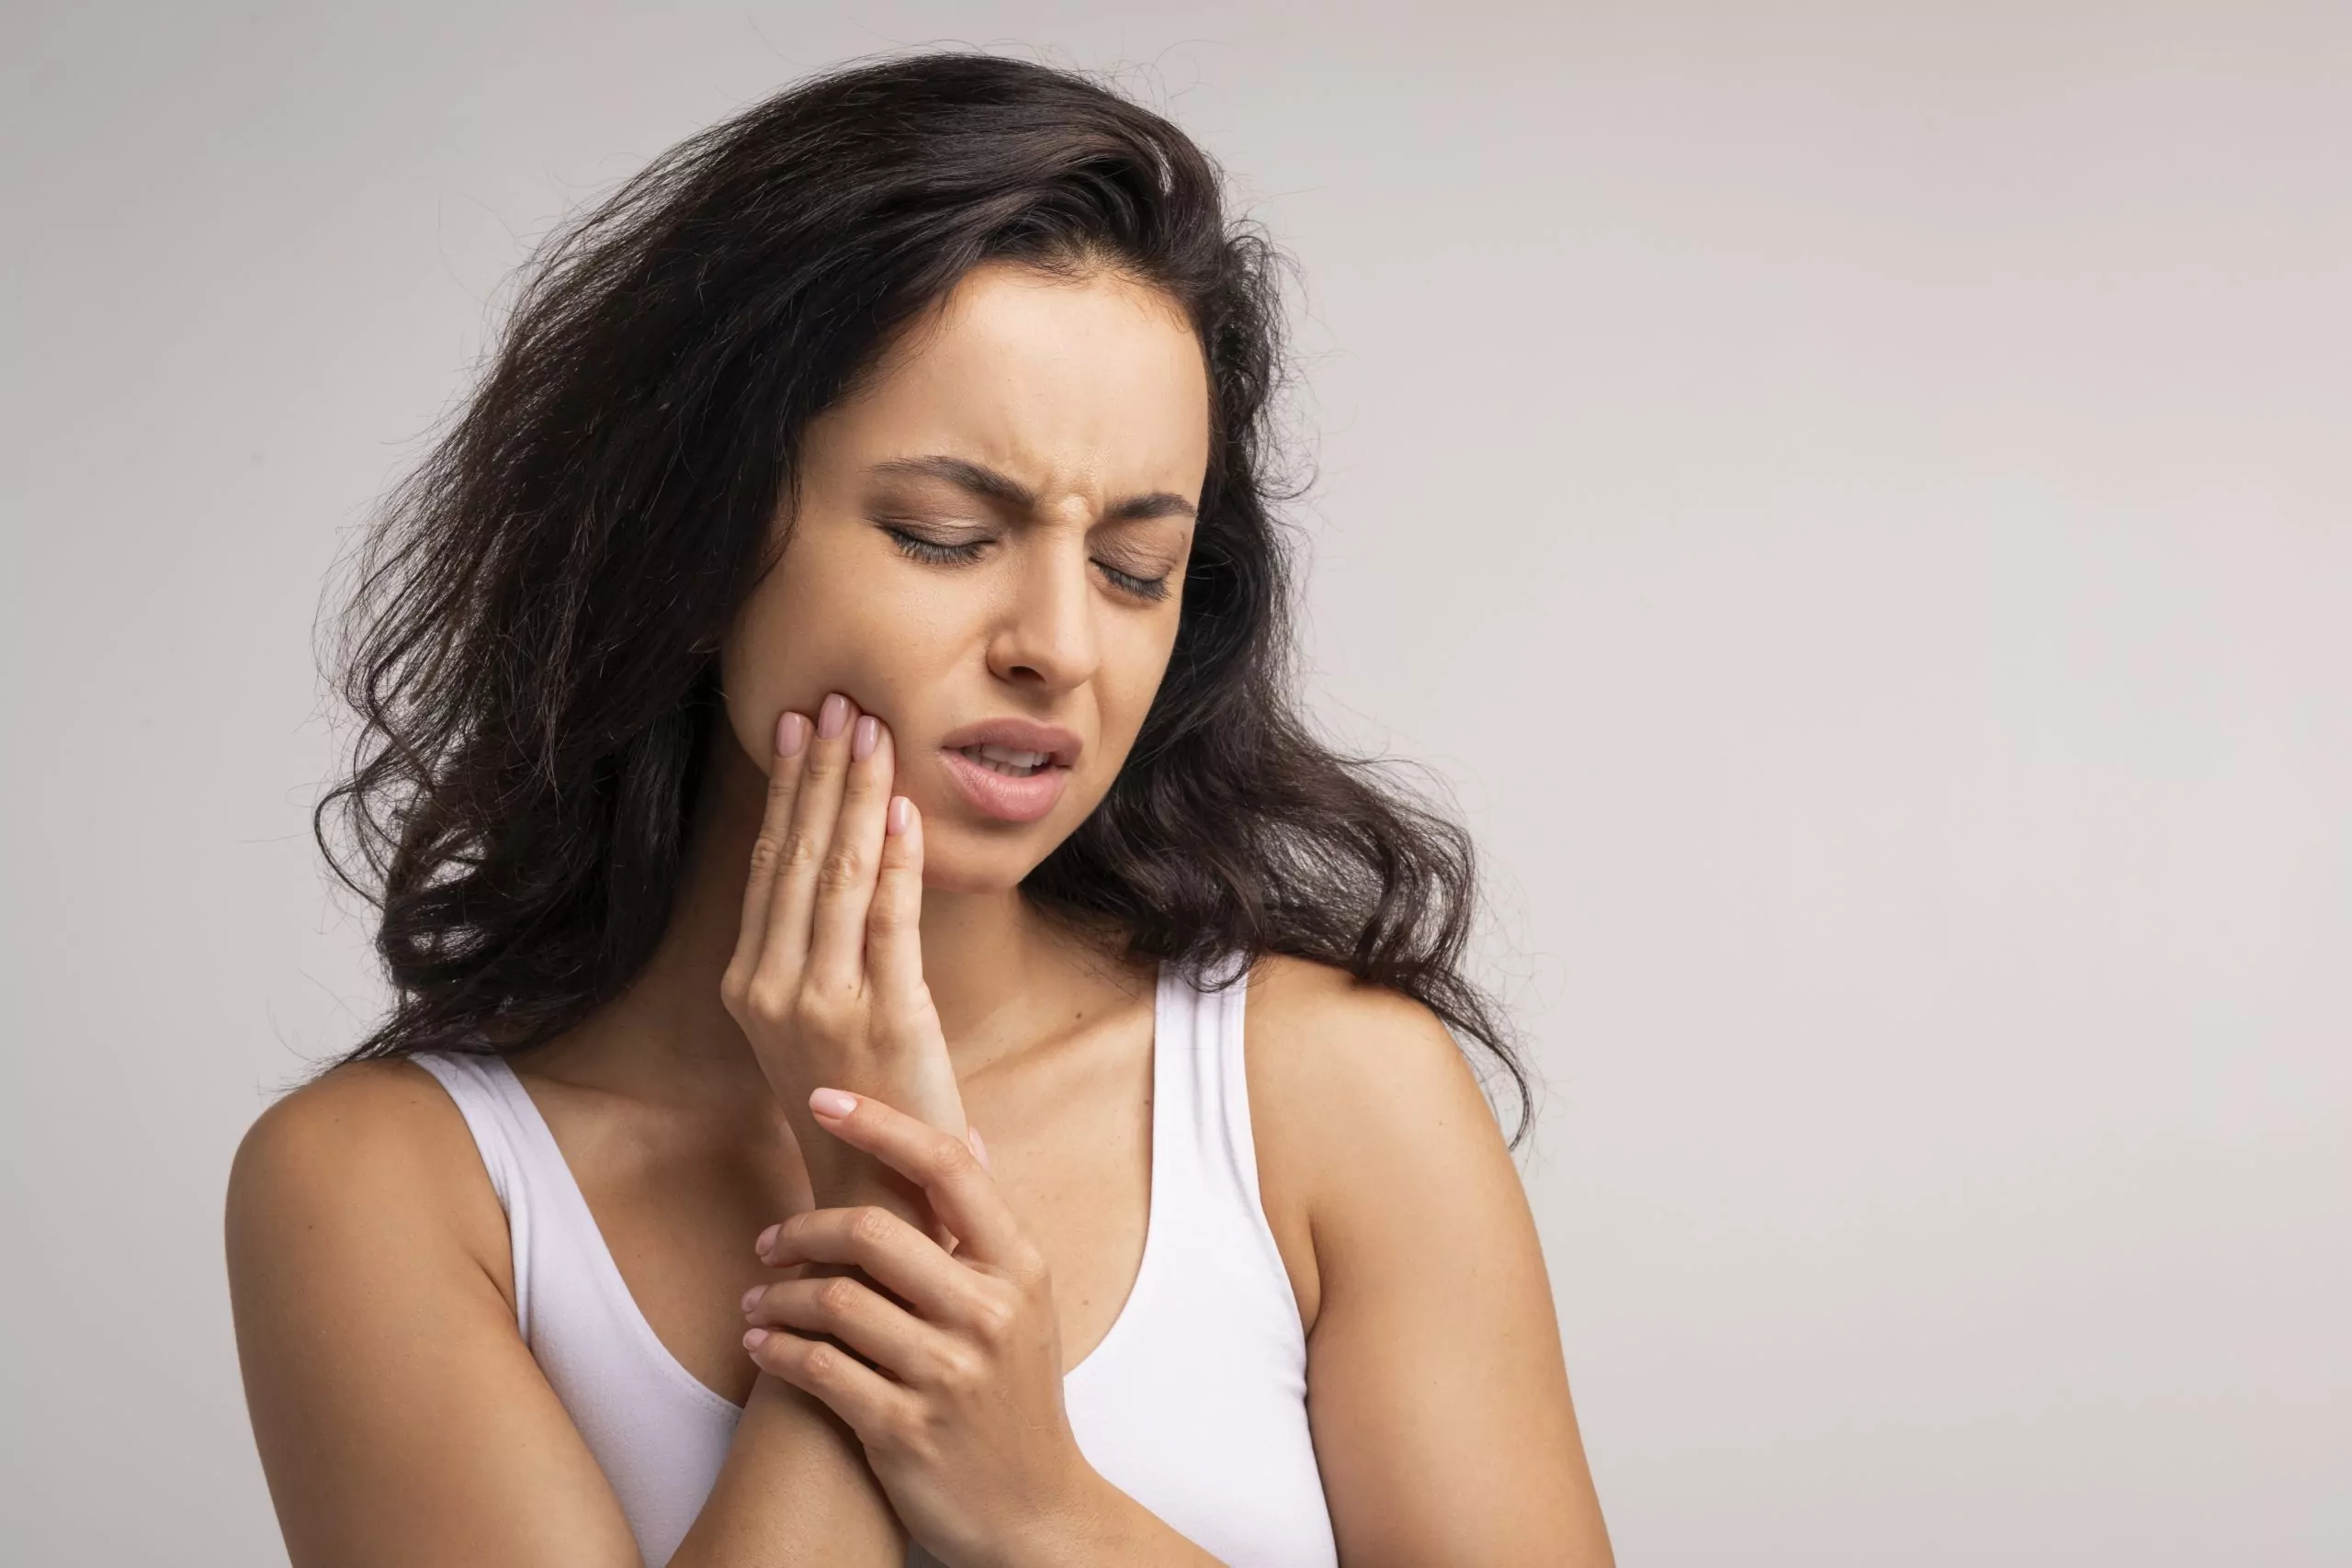 Upset millennial woman suffering from strong tooth pain